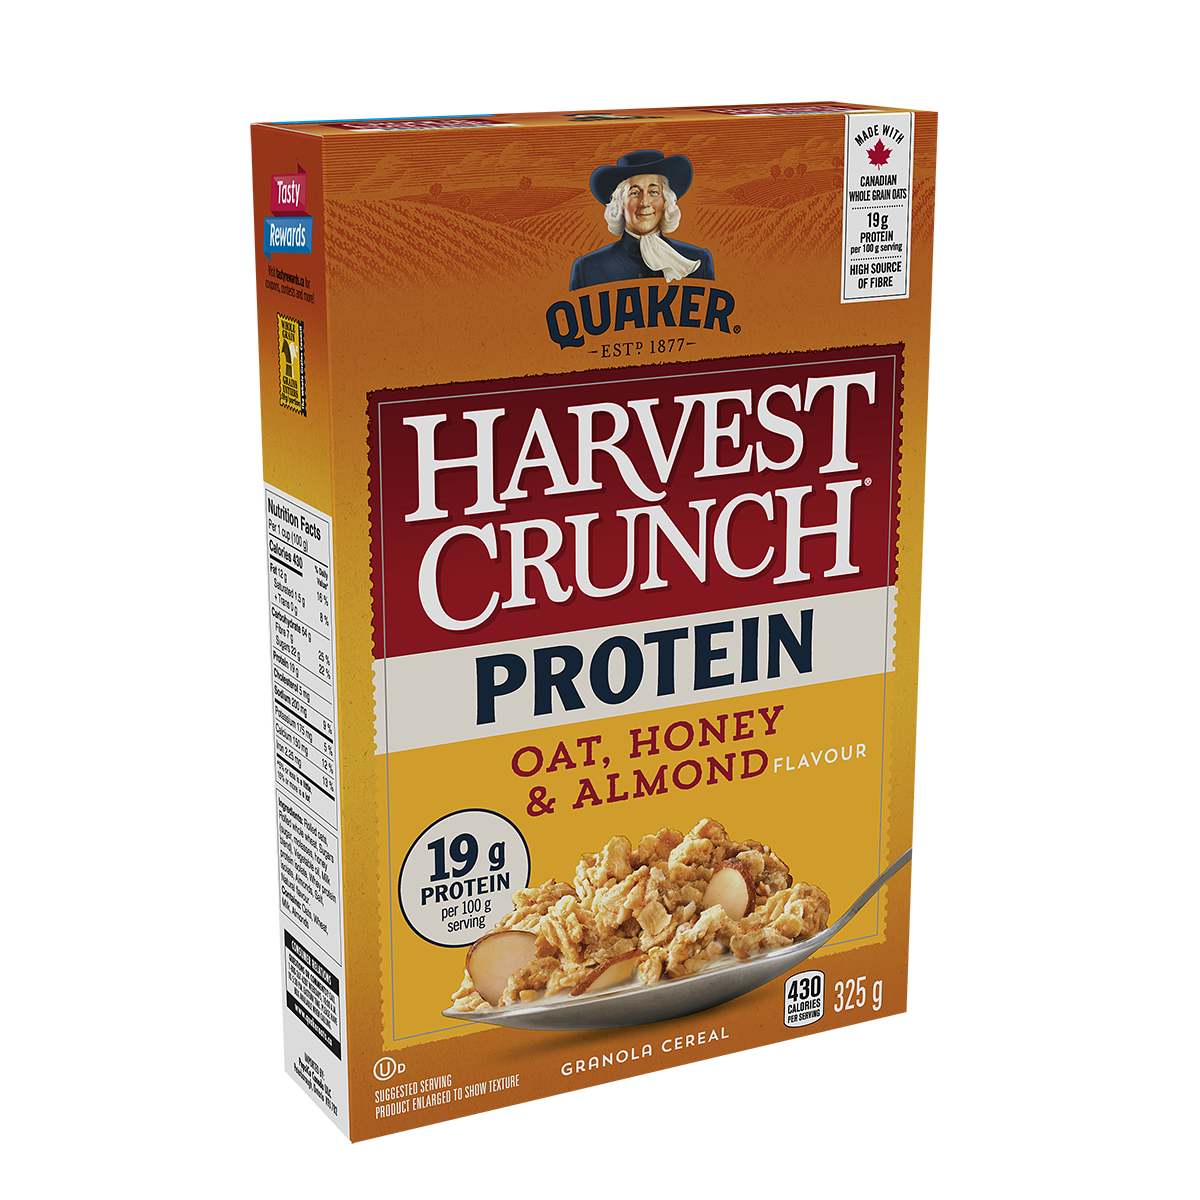 Quaker<sup>®</sup> Harvest Crunch<sup>®</sup> Protein Oat, Honey and Almond Flavour Granola Cereal